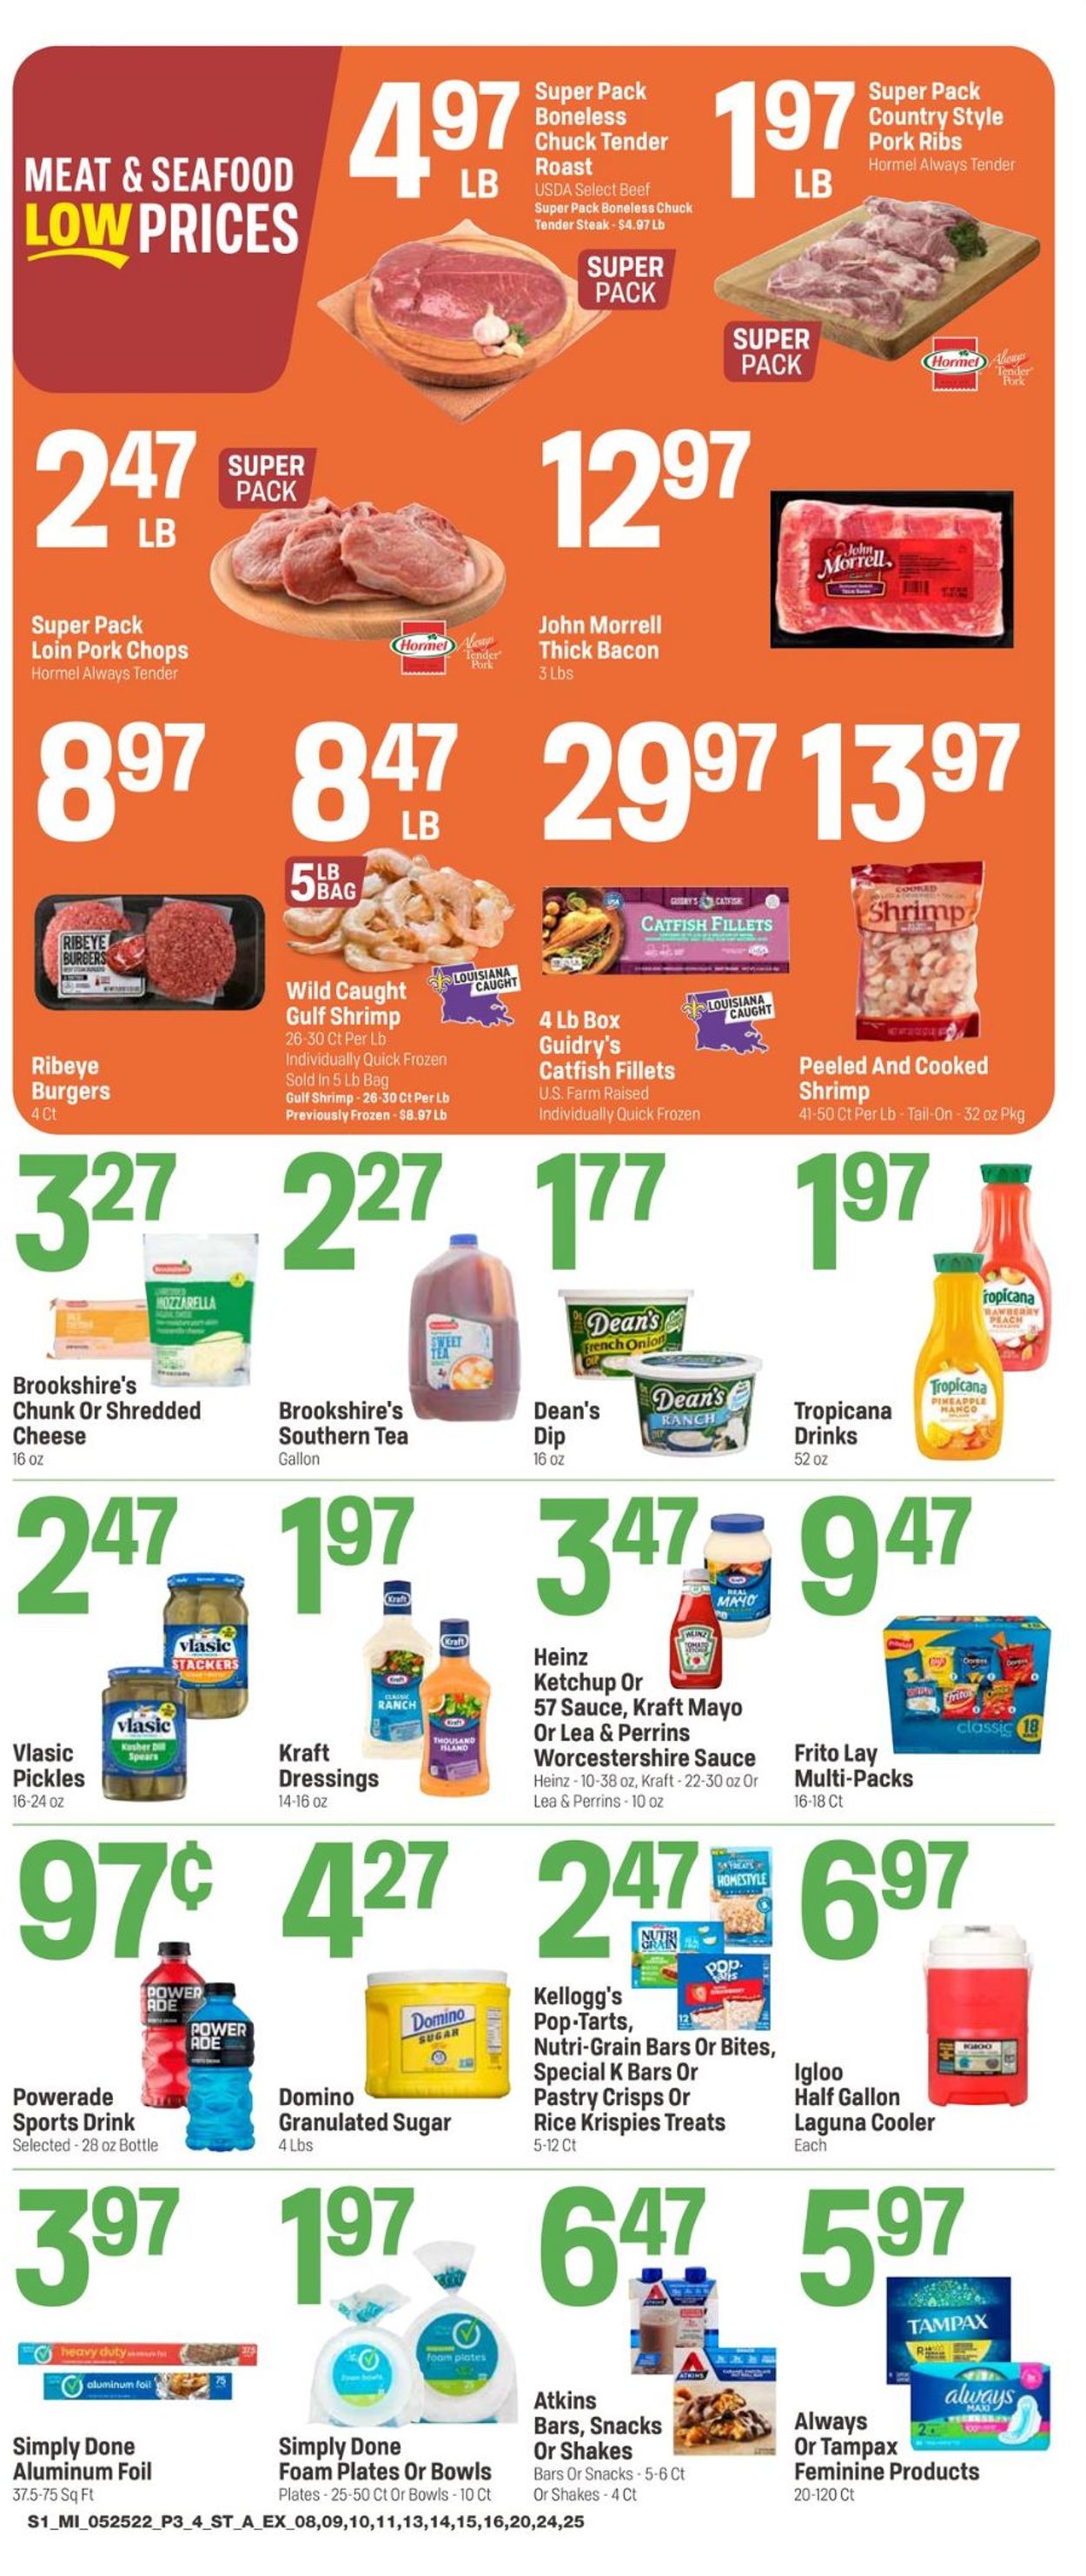 Catalogue Super 1 Foods from 05/25/2022